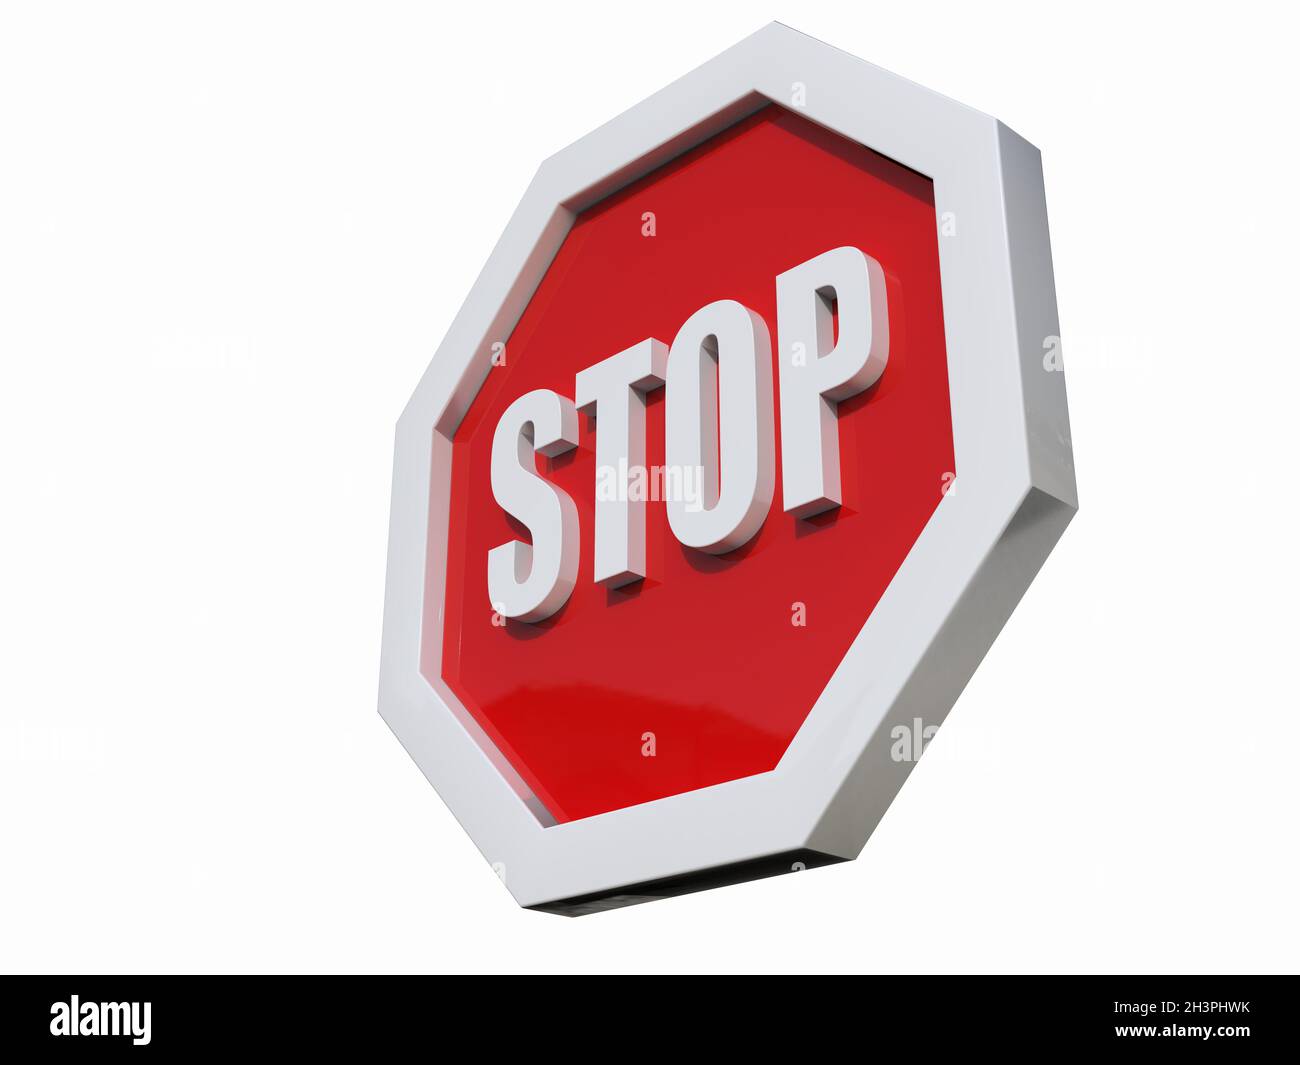 Roadsign with SymbolÂ for Prohibited Activities Stock Photo